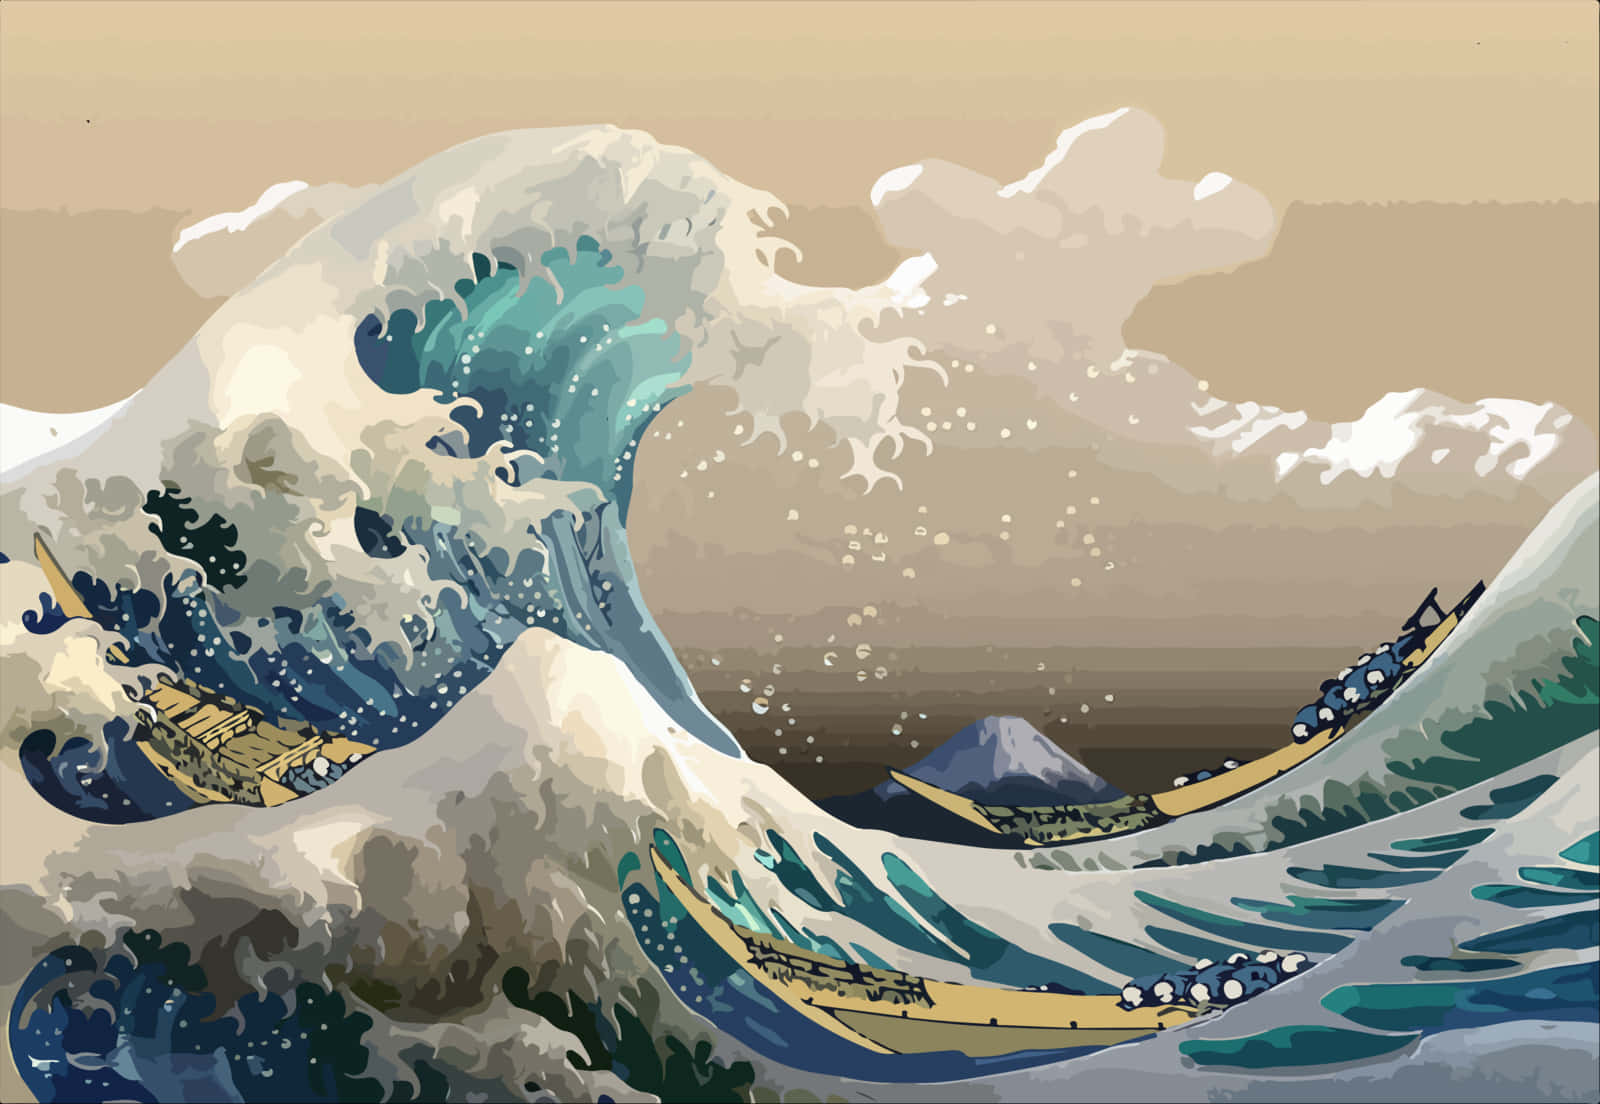 A painting of the great wave off japan - The Great Wave off Kanagawa